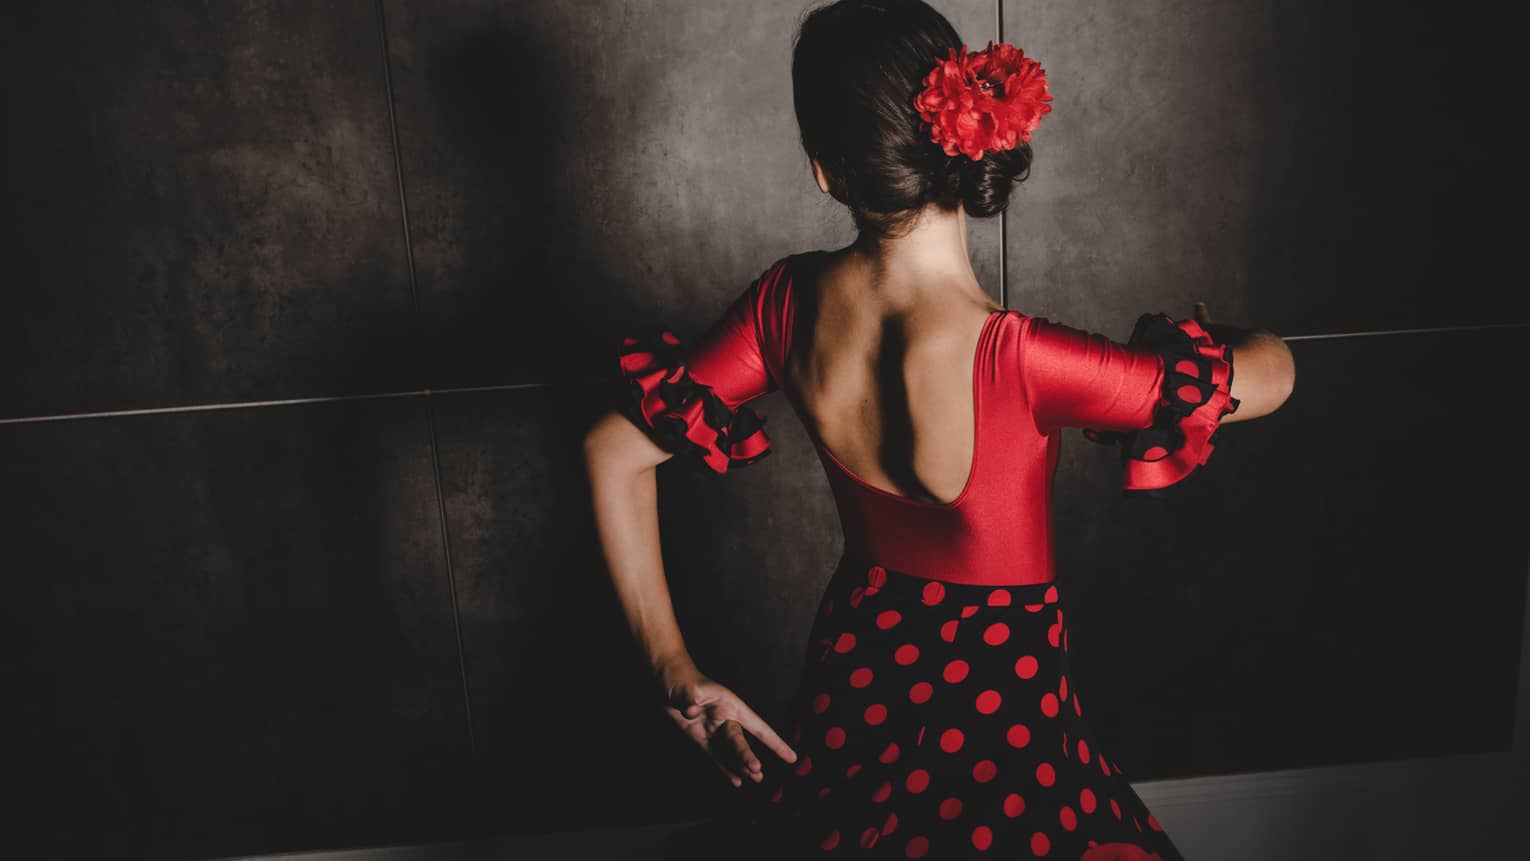 A woman wearing a black and red flamenco dress and red flower in her hair dances with her face turned away from the camera 